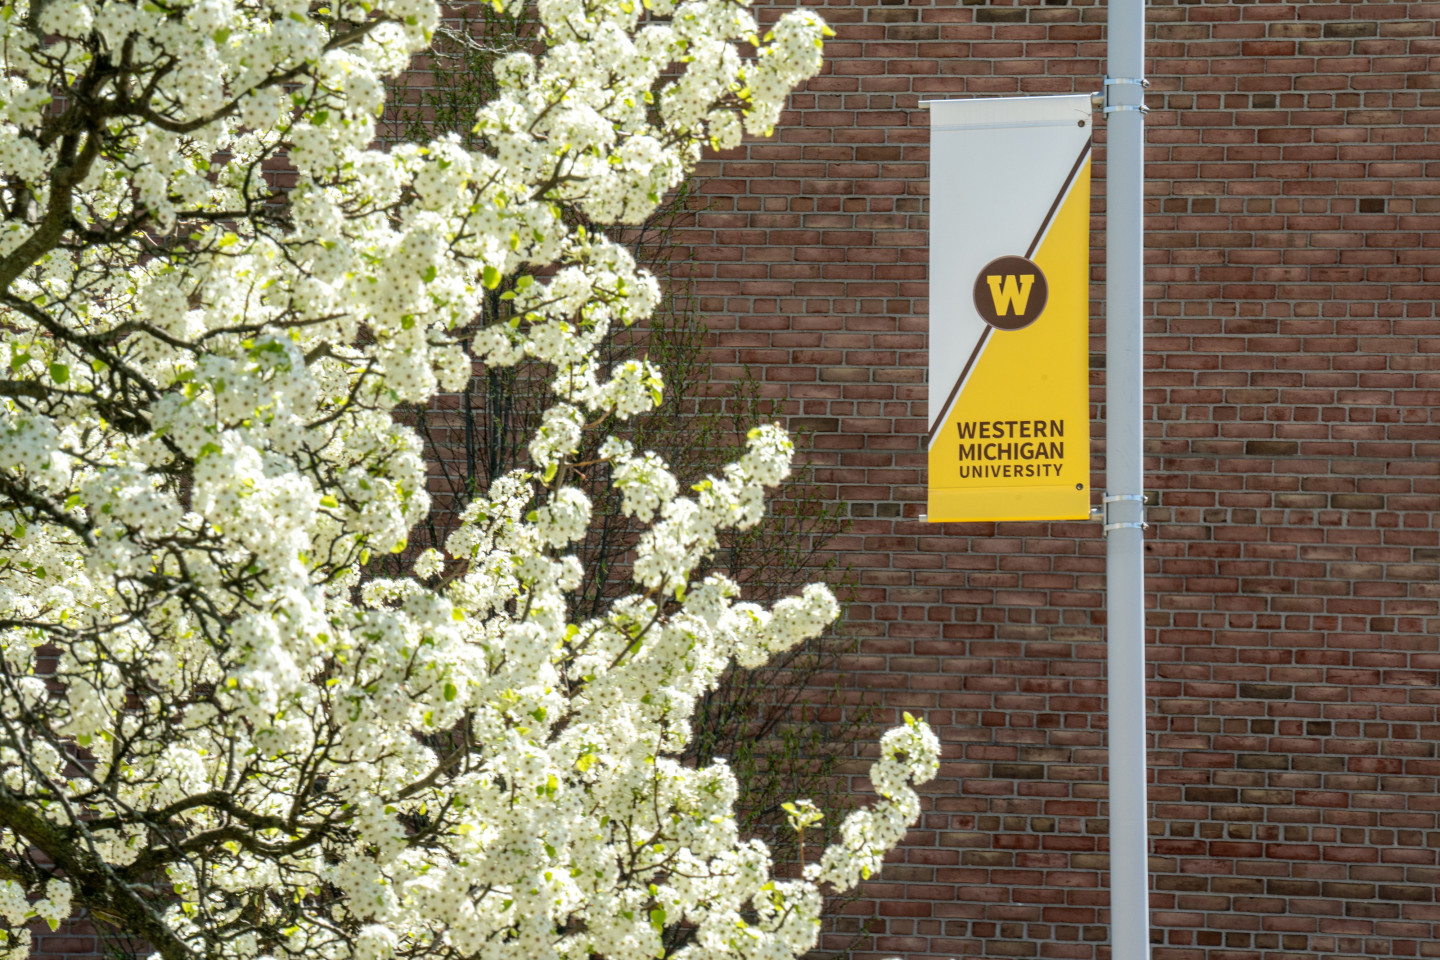 White flowers blooming next to a Western Michigan University flag.